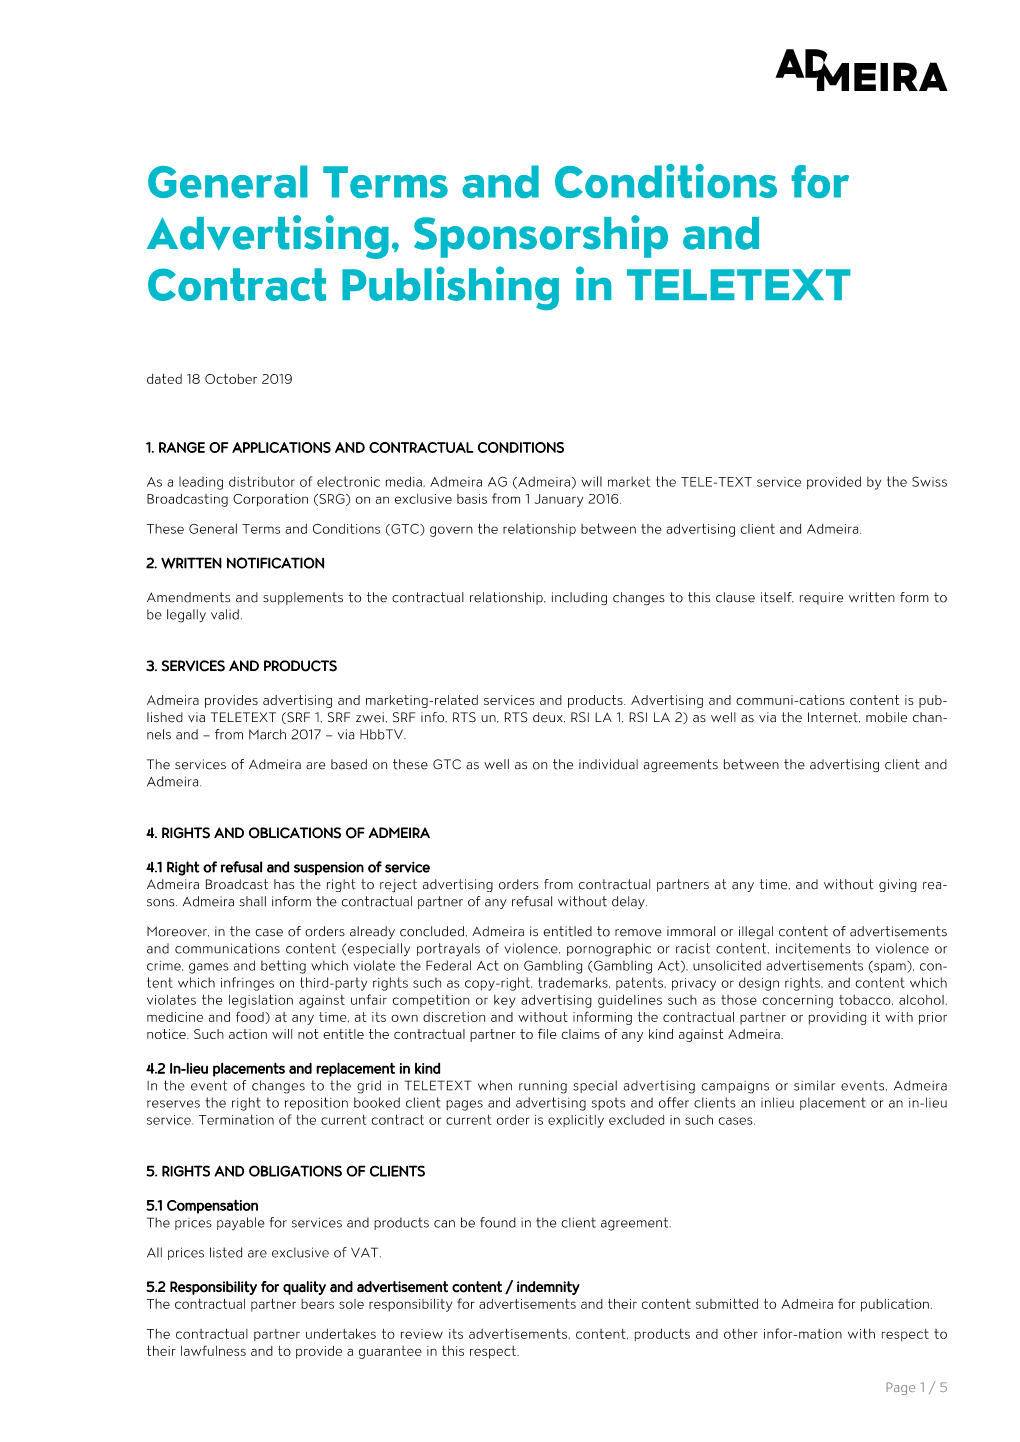 General Terms and Conditions for Advertising, Sponsorship and Contract Publishing in TELETEXT